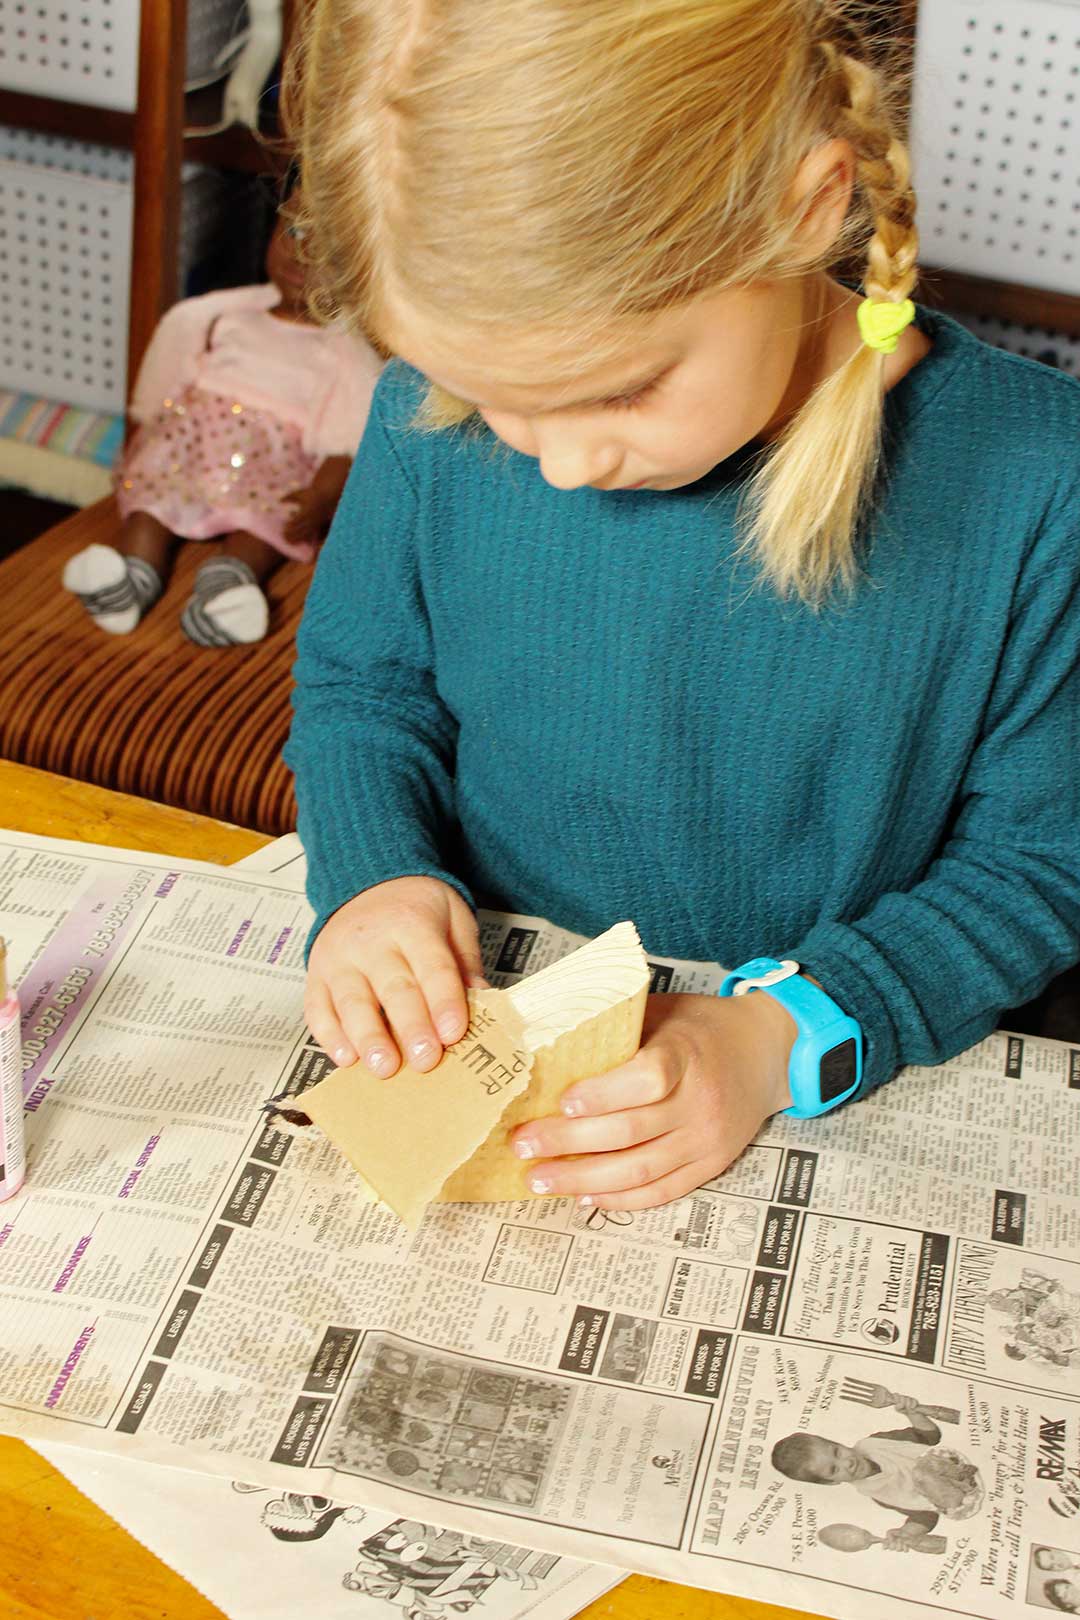 Young girl with blonde hair and pigtail braids sands her block of wood with sandpaper.